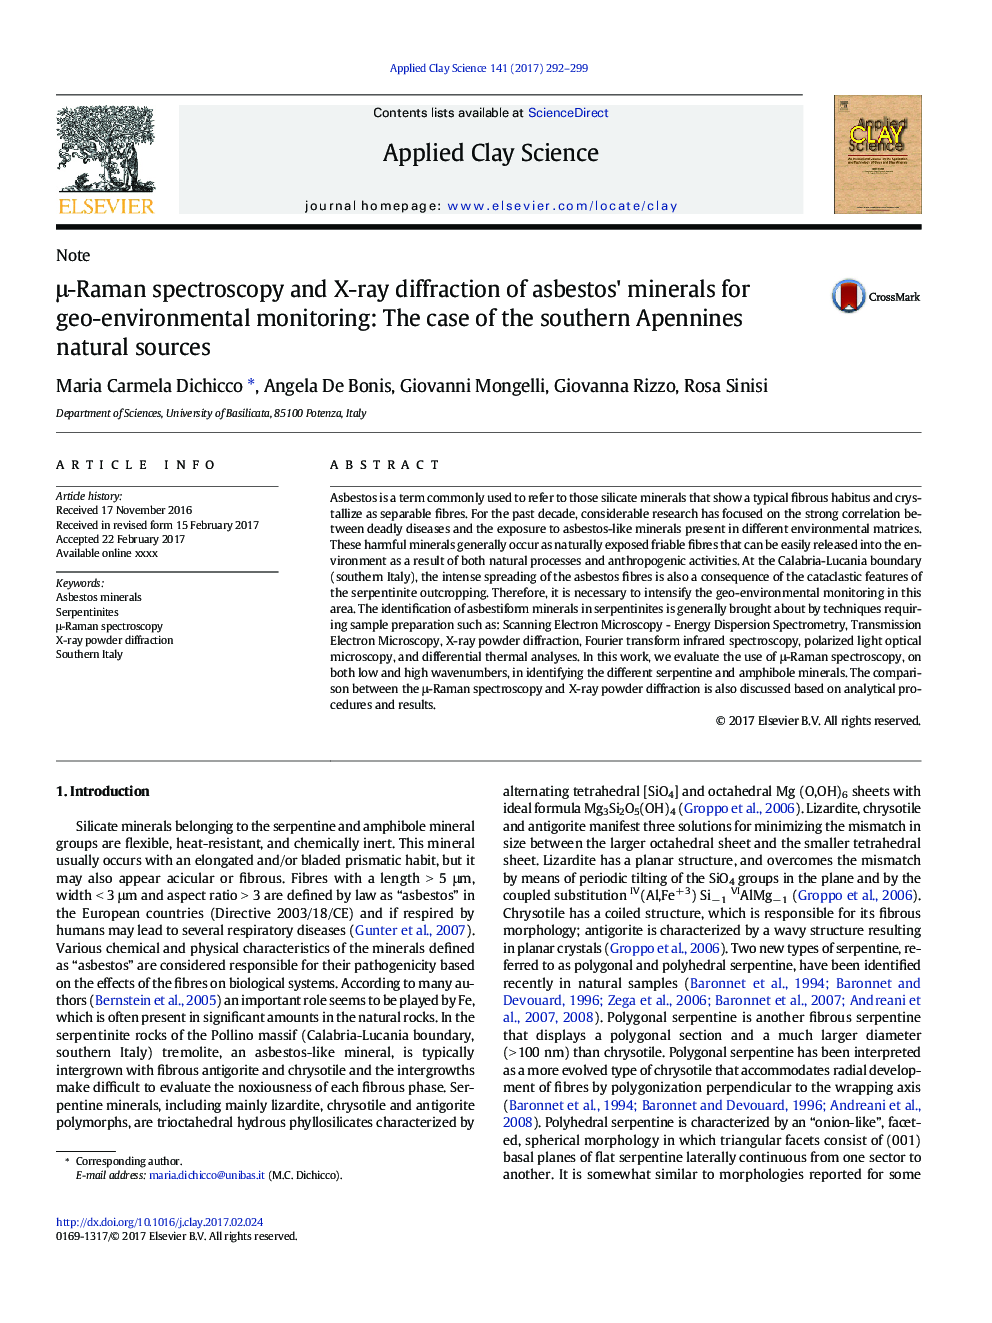 Î¼-Raman spectroscopy and X-ray diffraction of asbestos' minerals for geo-environmental monitoring: The case of the southern Apennines natural sources